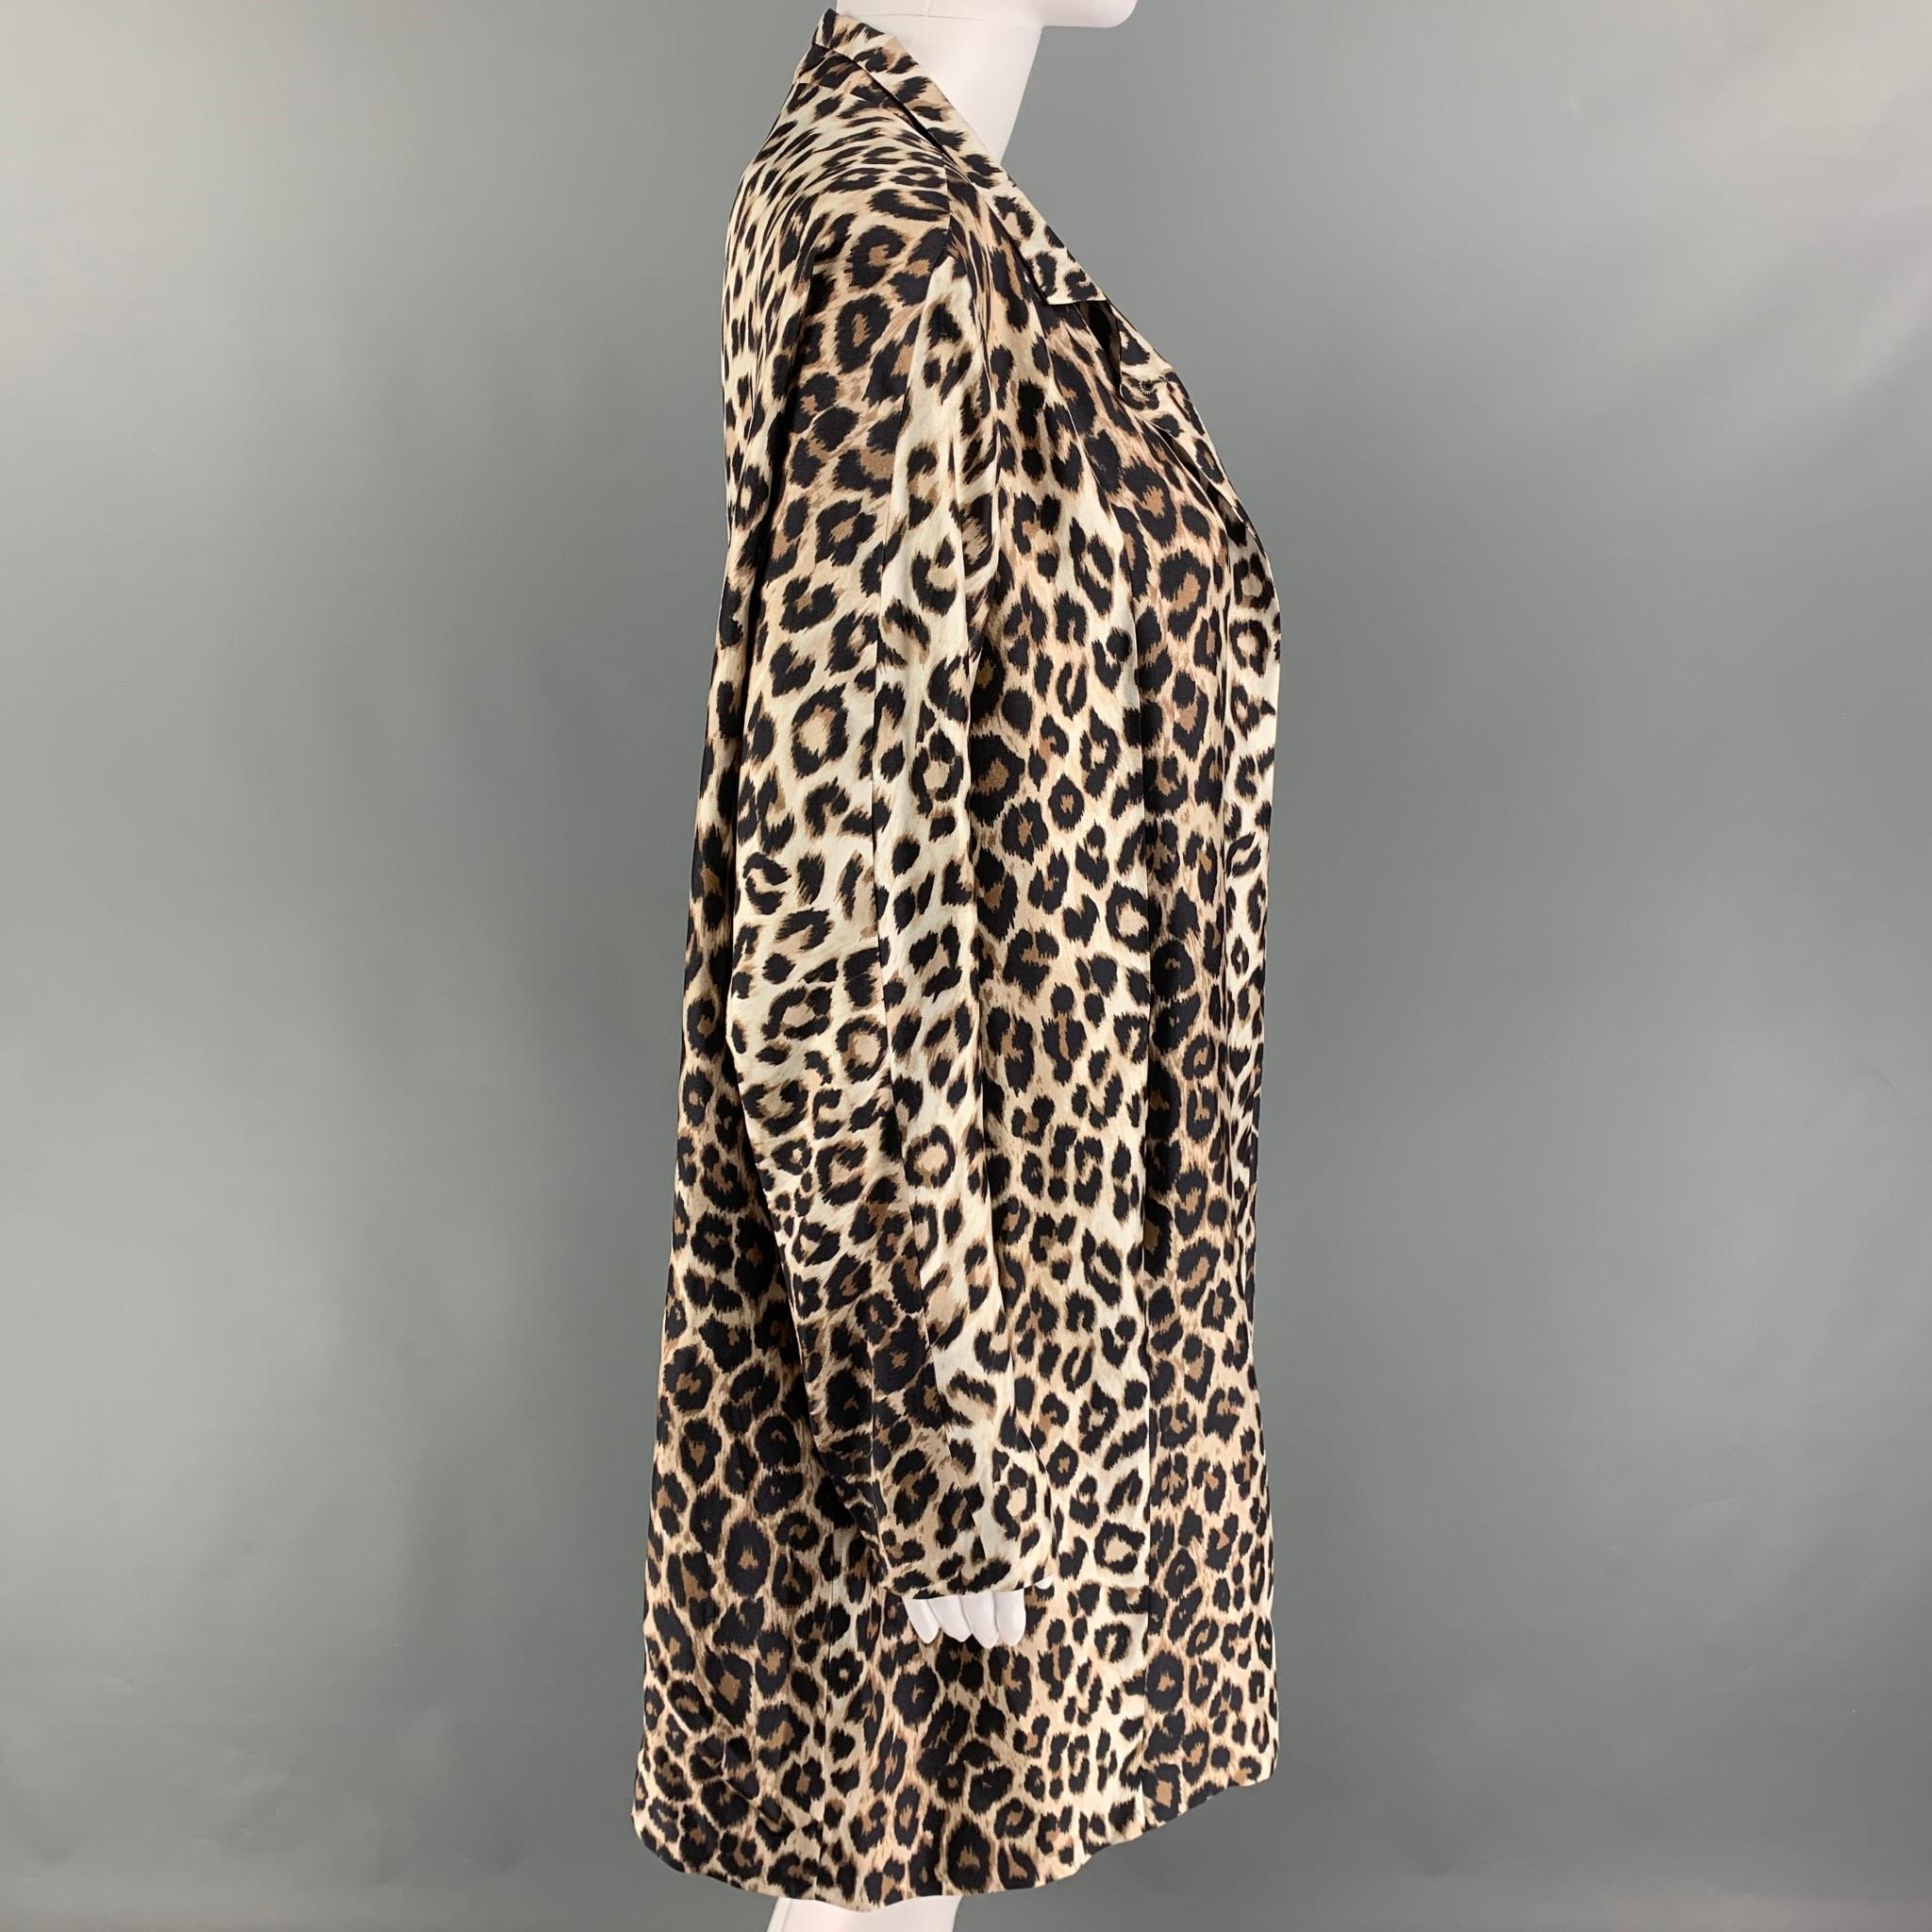 LA PRESTIC OUISTON coat comes in a beige & brown animal print silk featuring a notch lapel, slit pockets, and a open front. 

Excellent Pre-Owned Condition.
Marked: 1
Original Retail Price: $1,380.00

Measurements:

Shoulder: 16 in.
Bust: 40